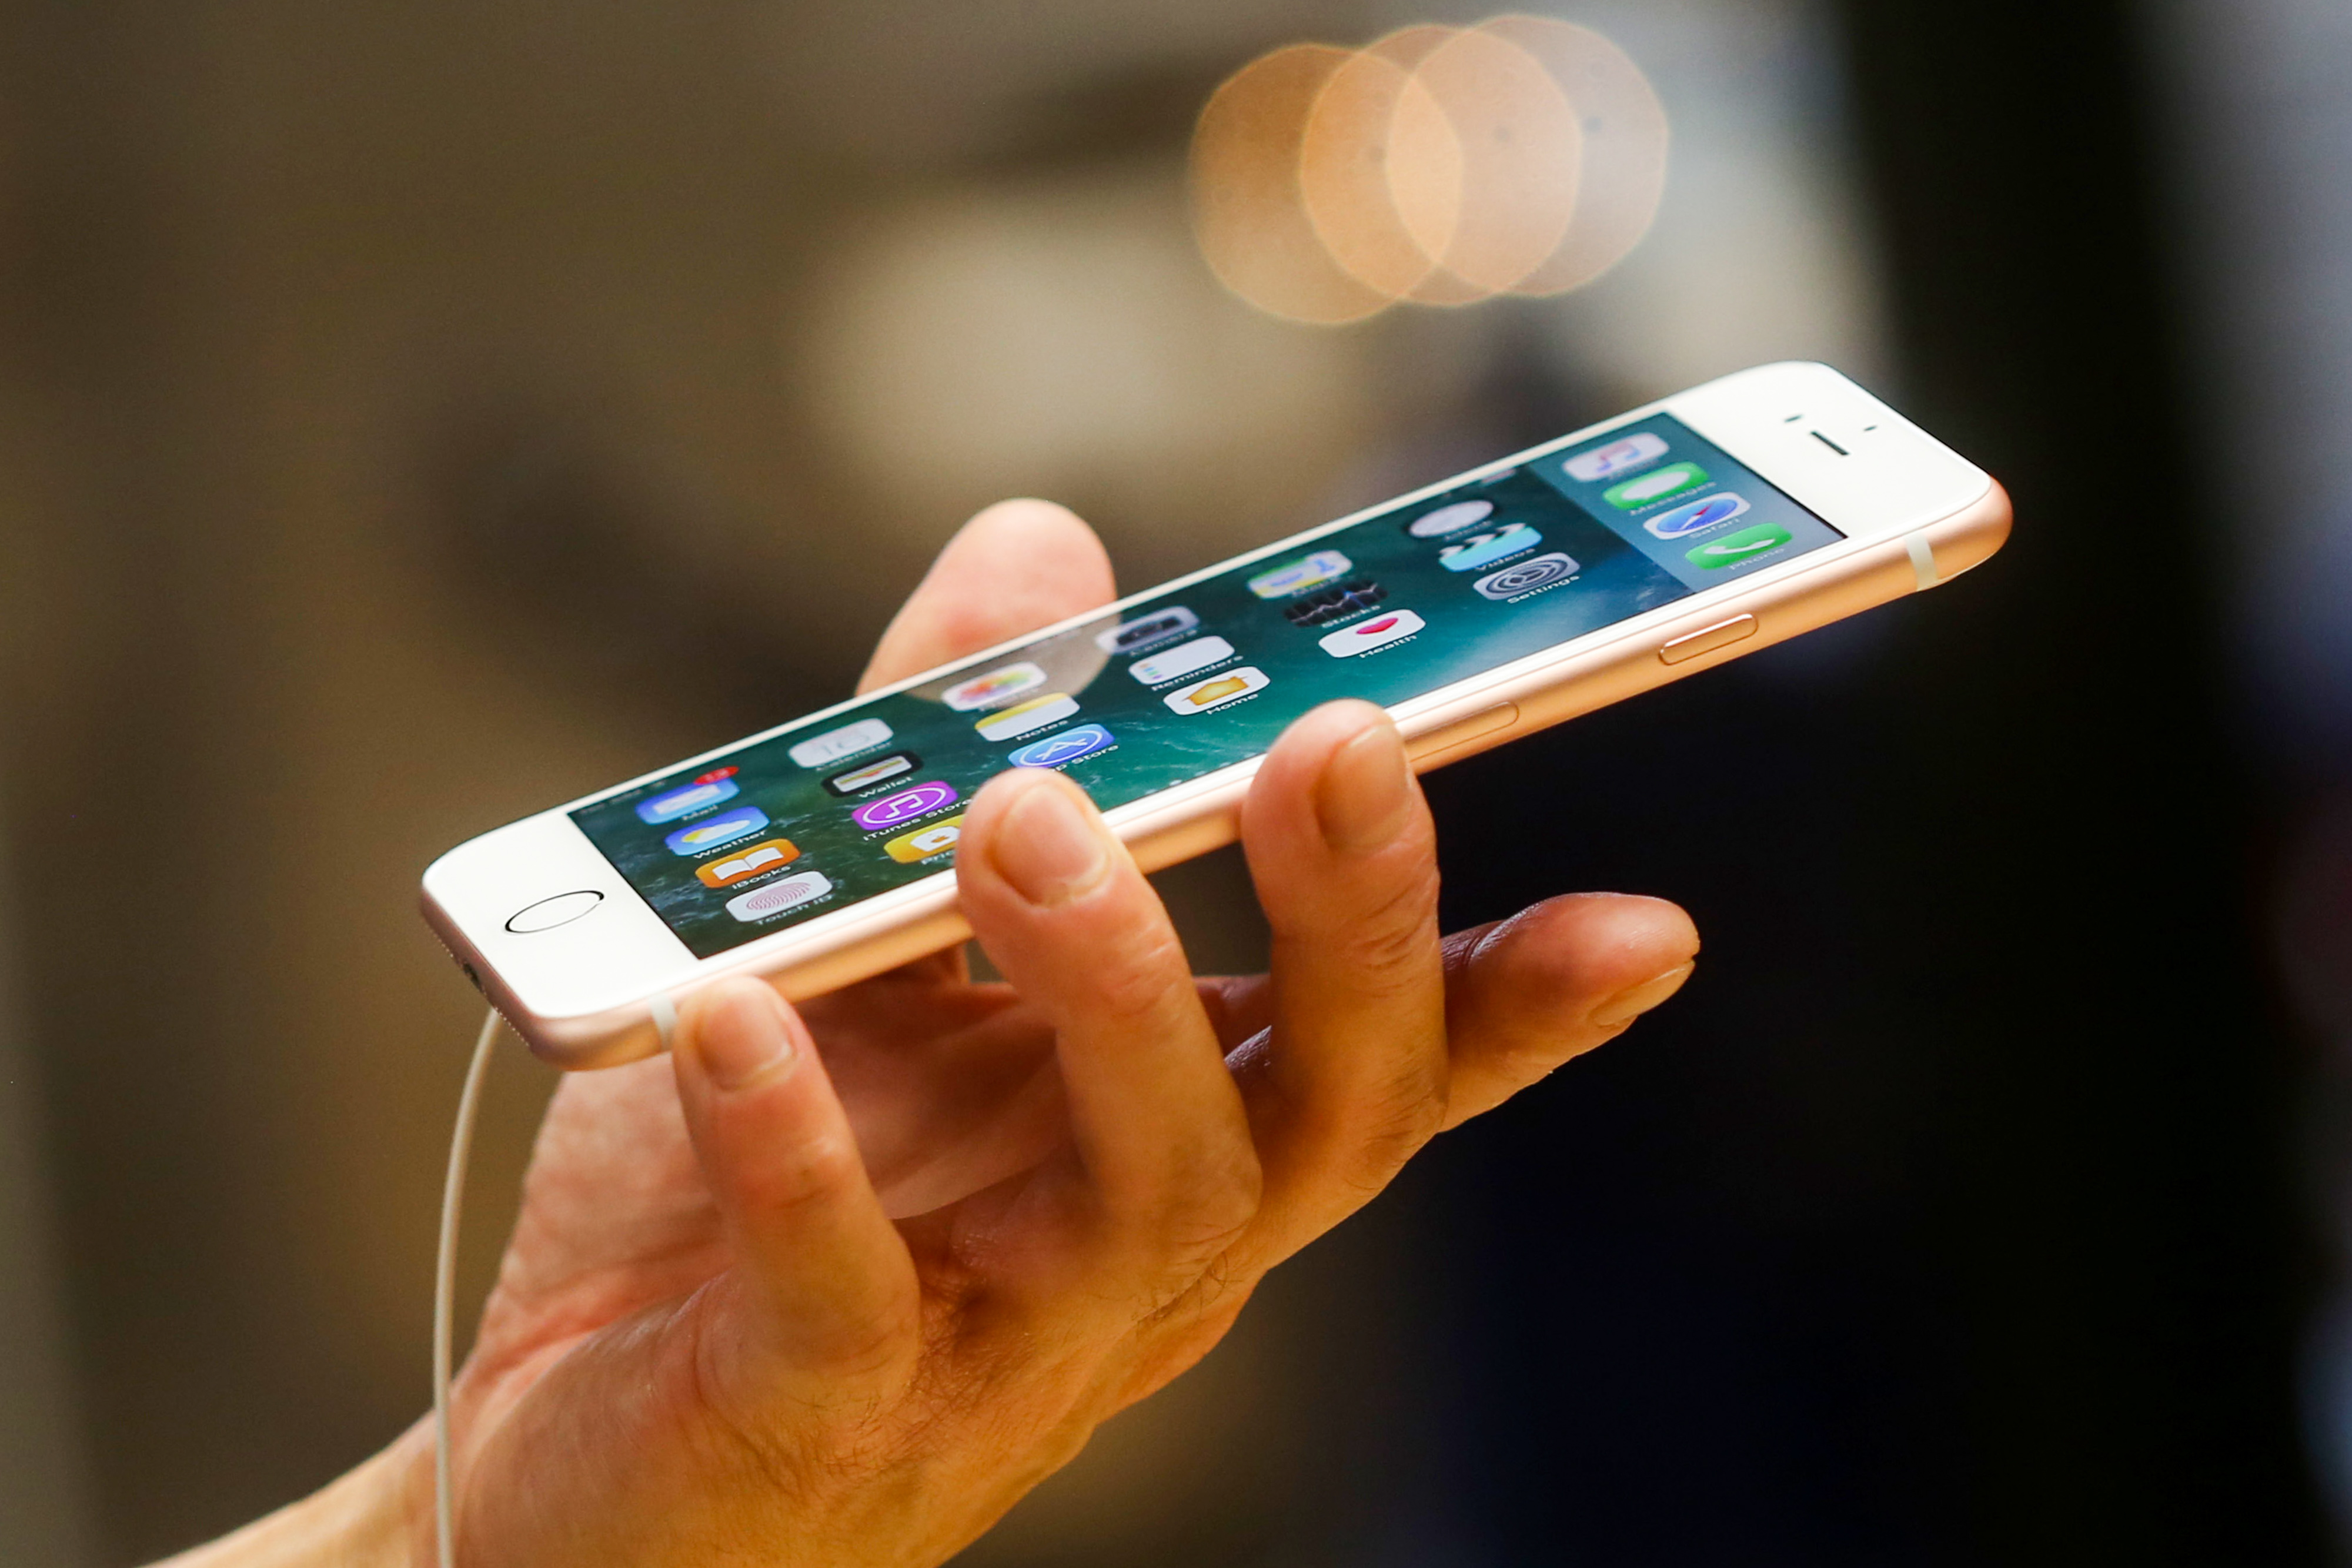 A customer inspects a new iPhone 7 plus smartphone inside the Apple Inc. Covent Garden store in London, U.K., on Friday, Sept. 16, 2016. (Bloomberg—Getty Images)